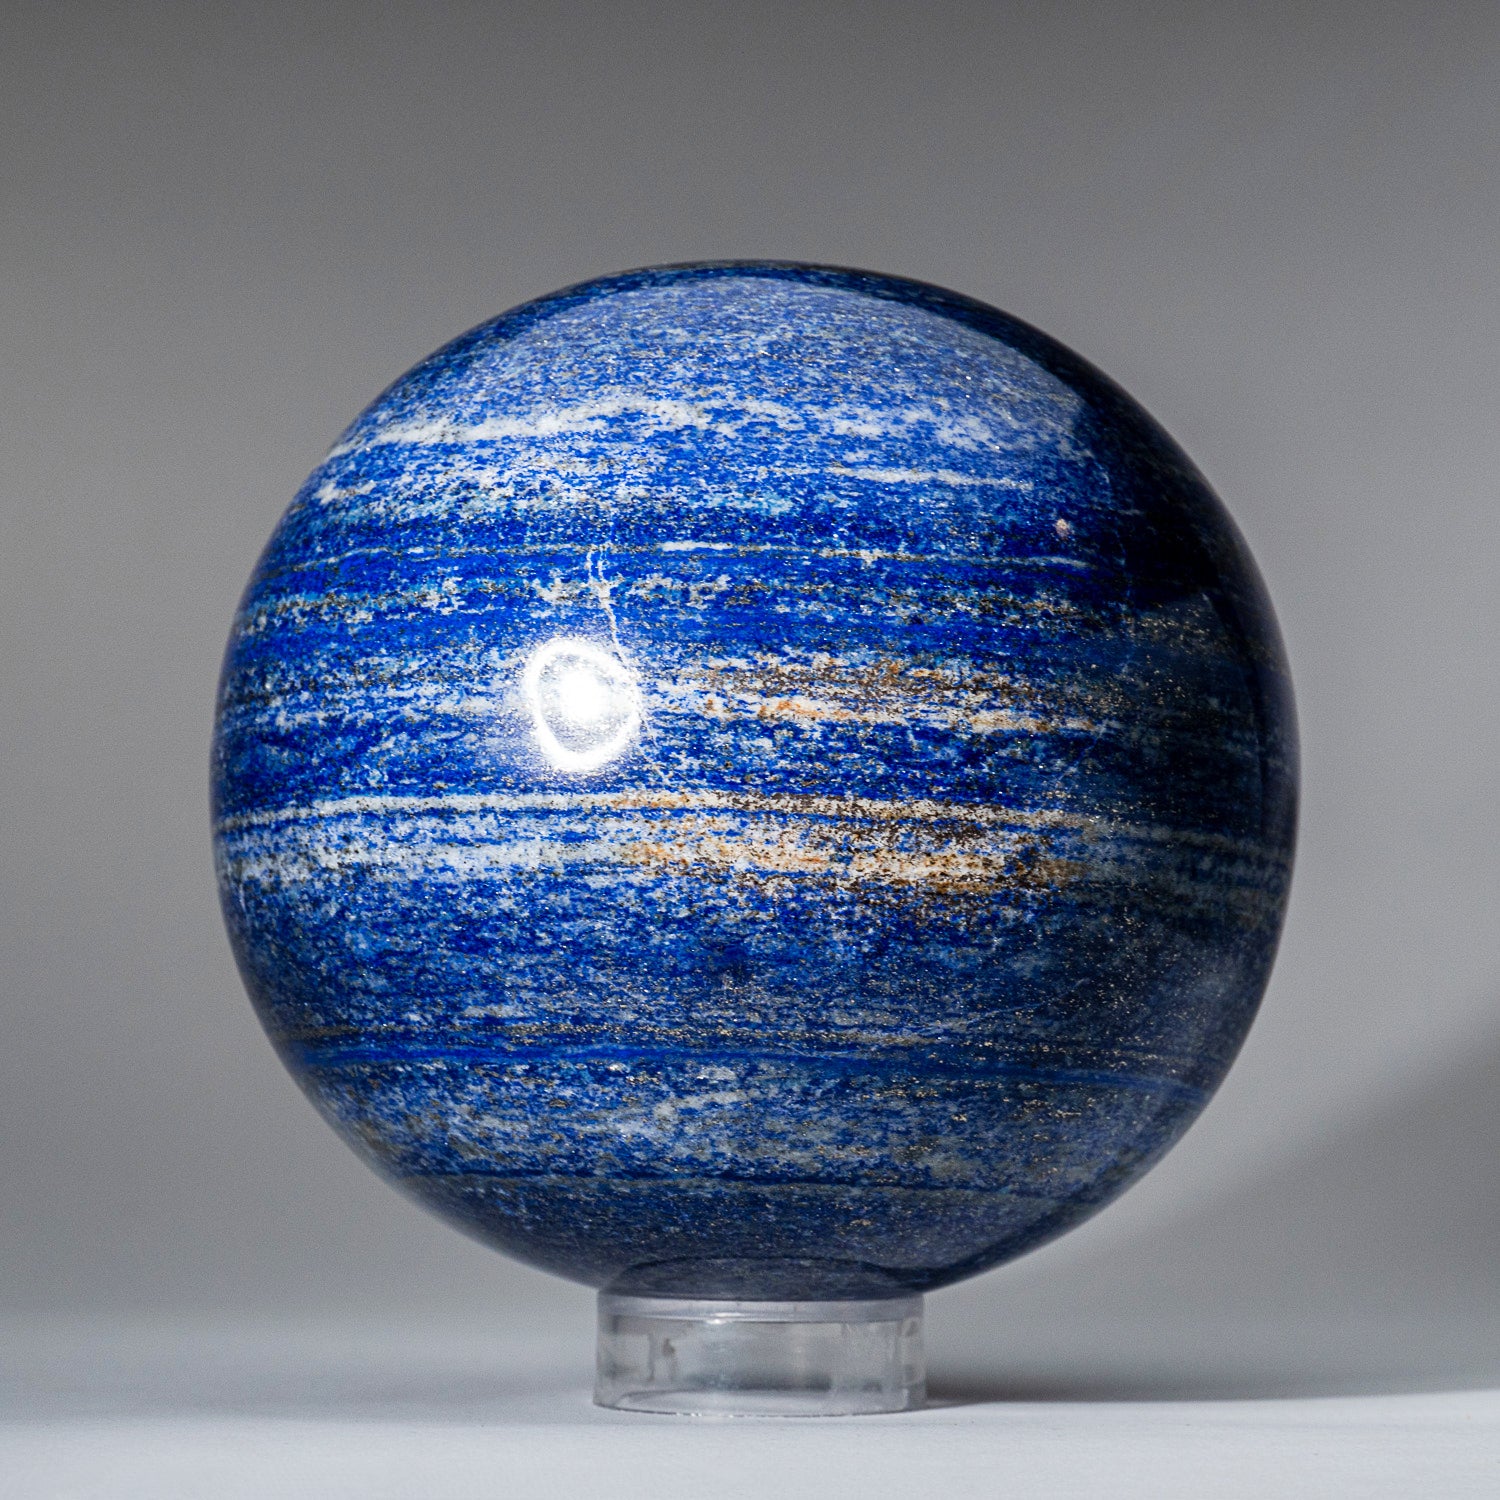 Polished Lapis Lazuli Sphere from Afghanistan (5.5", 11 lbs)